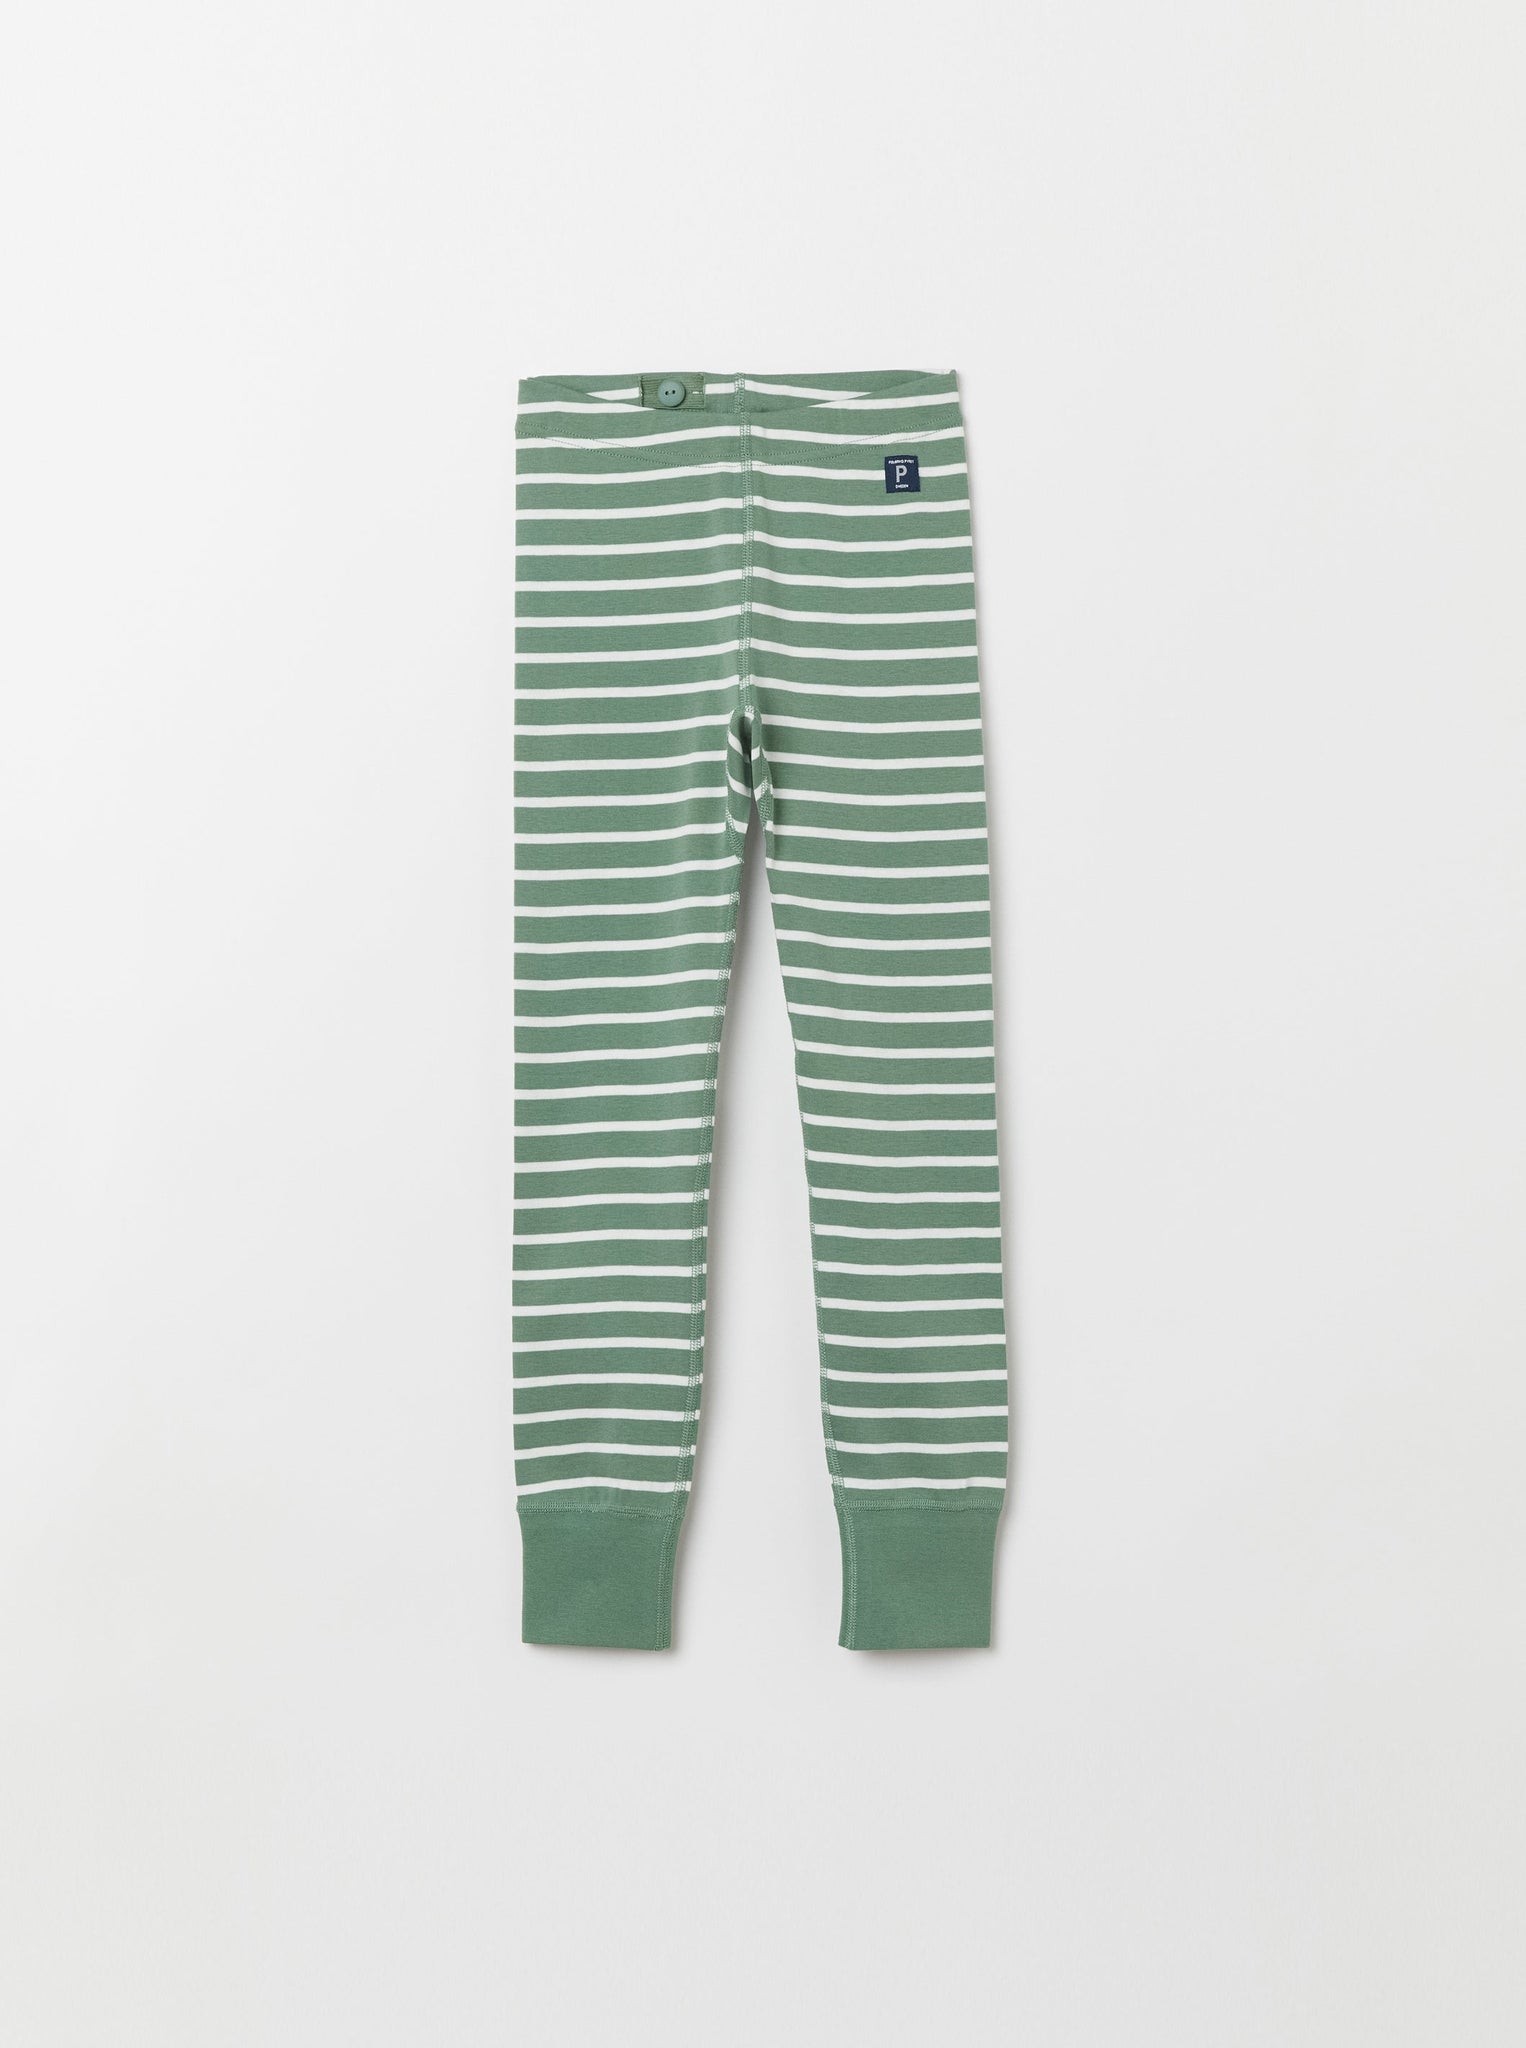 Organic Cotton Green Kids Leggings from the Polarn O. Pyret Kidswear collection. Clothes made using sustainably sourced materials.